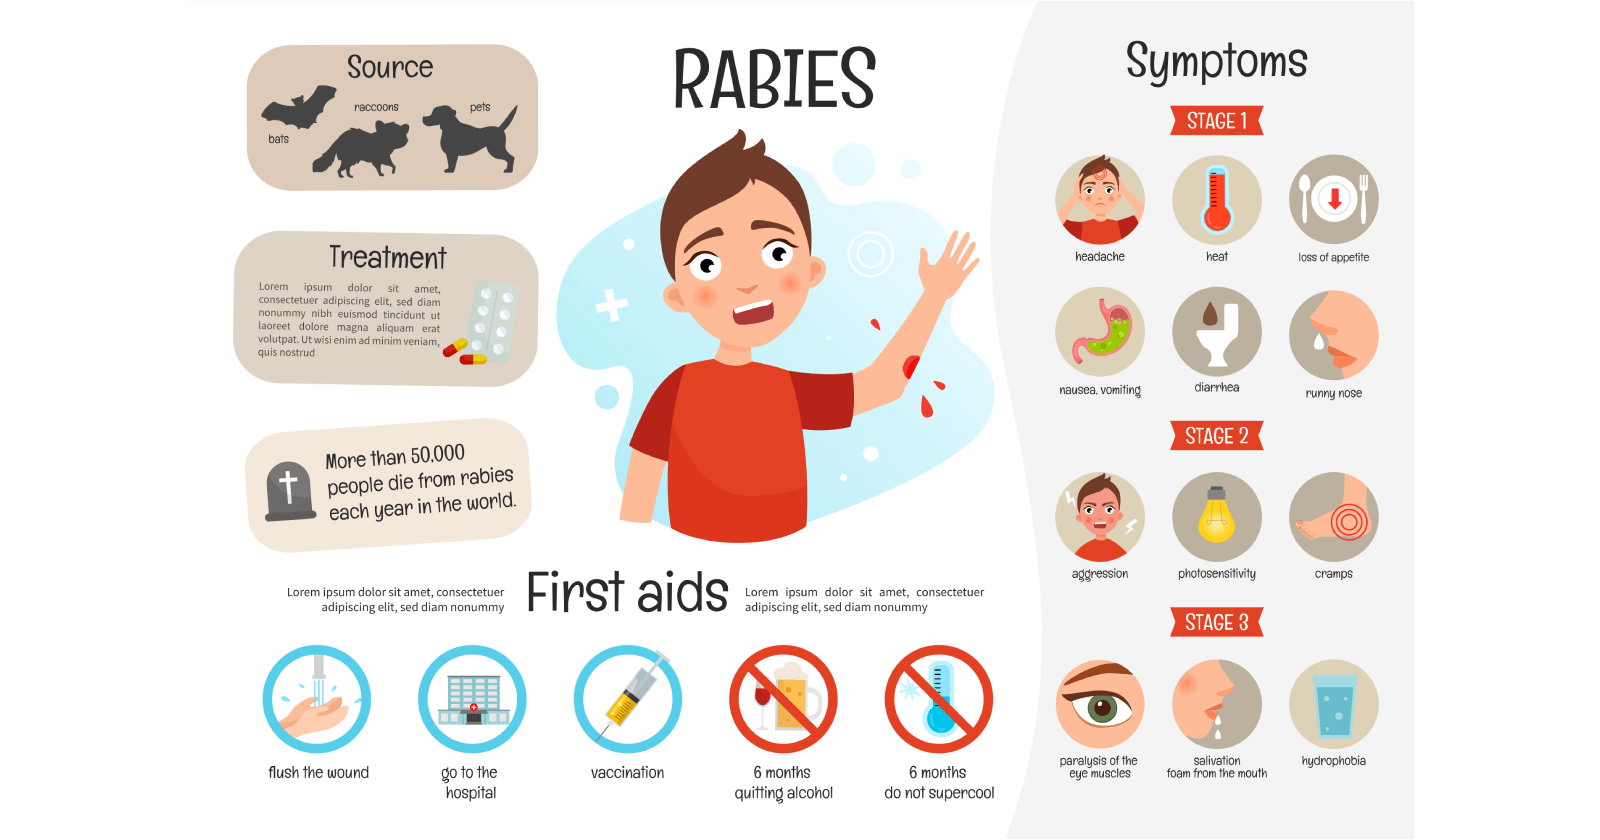 Understanding Rabies: Symptoms, causes and treatments